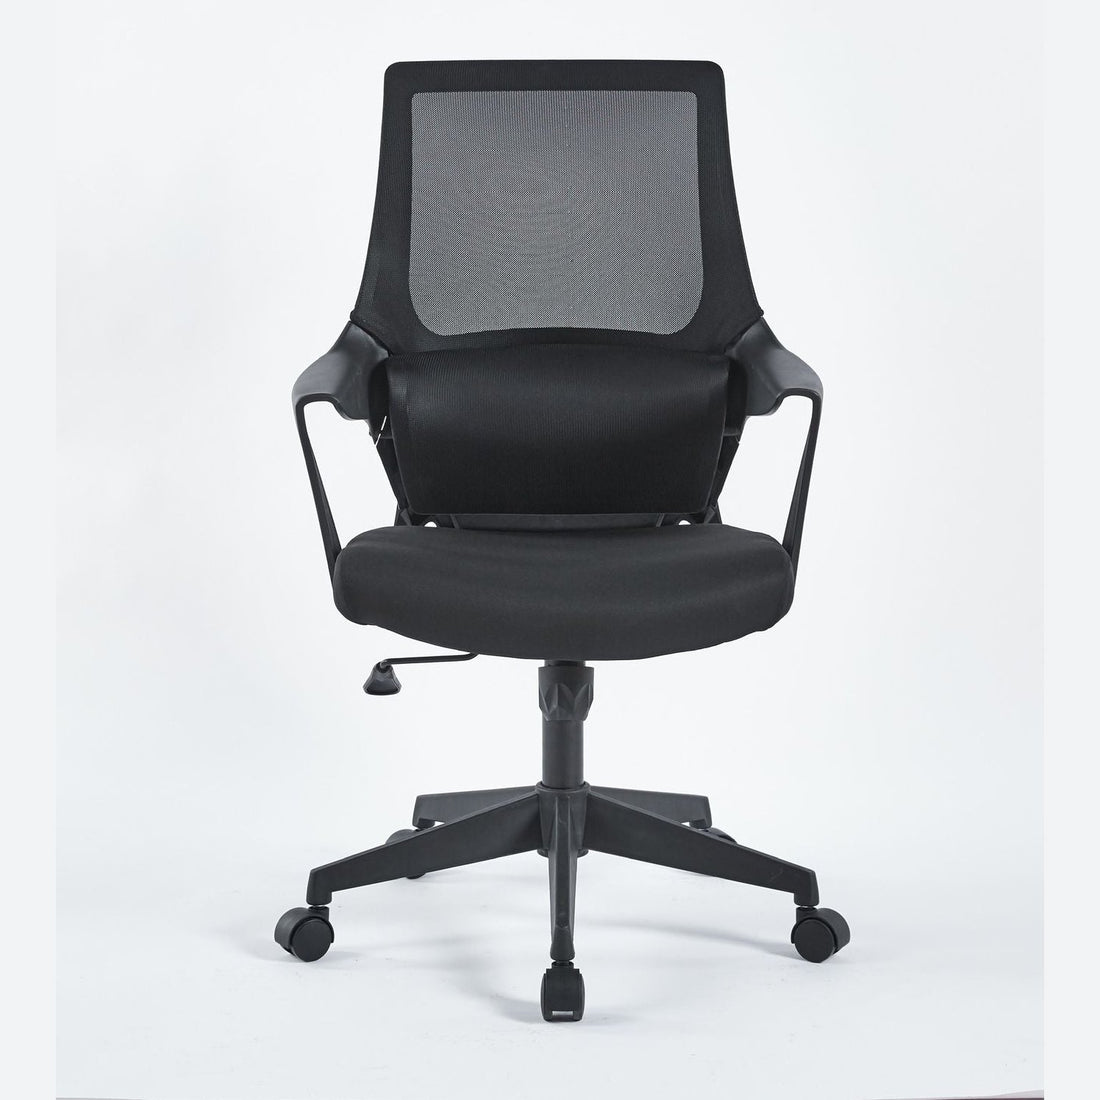 M33 Luxury Mid Back Chair FC